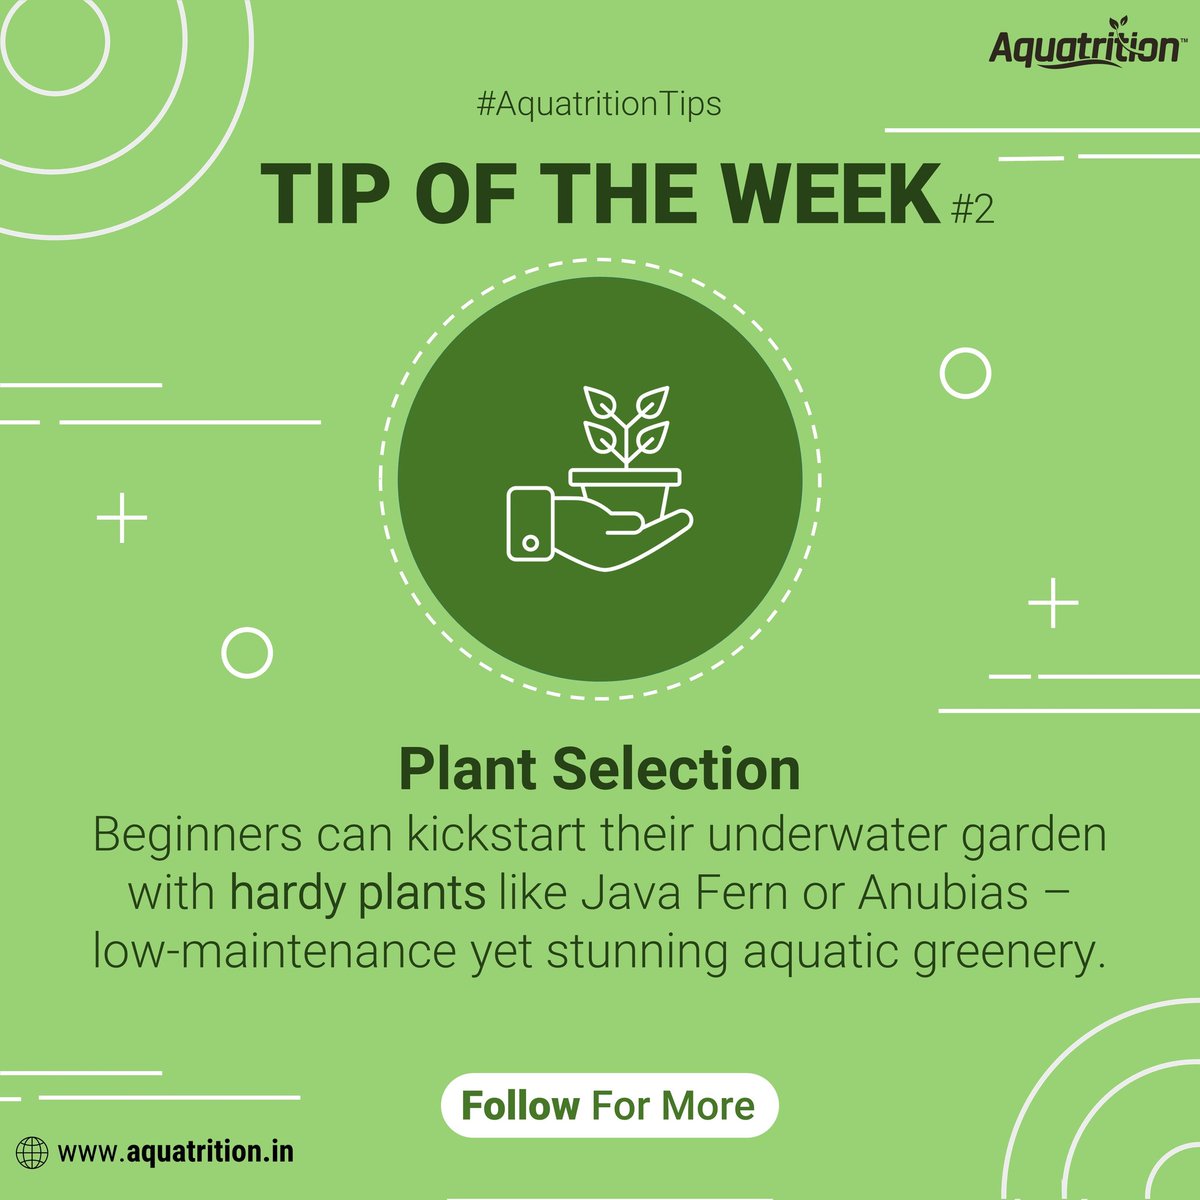 🌱 Aquatrition's #tipoftheweek ! 🐠 Elevate your planted aquarium journey with our expertly curated tips. Stay tuned every week! Follow for more, and don’t forget to spread the knowledge with fellow aquatic enthusiast.

#protipfriday #usefultips #aquatrition #aquatritiontips #2